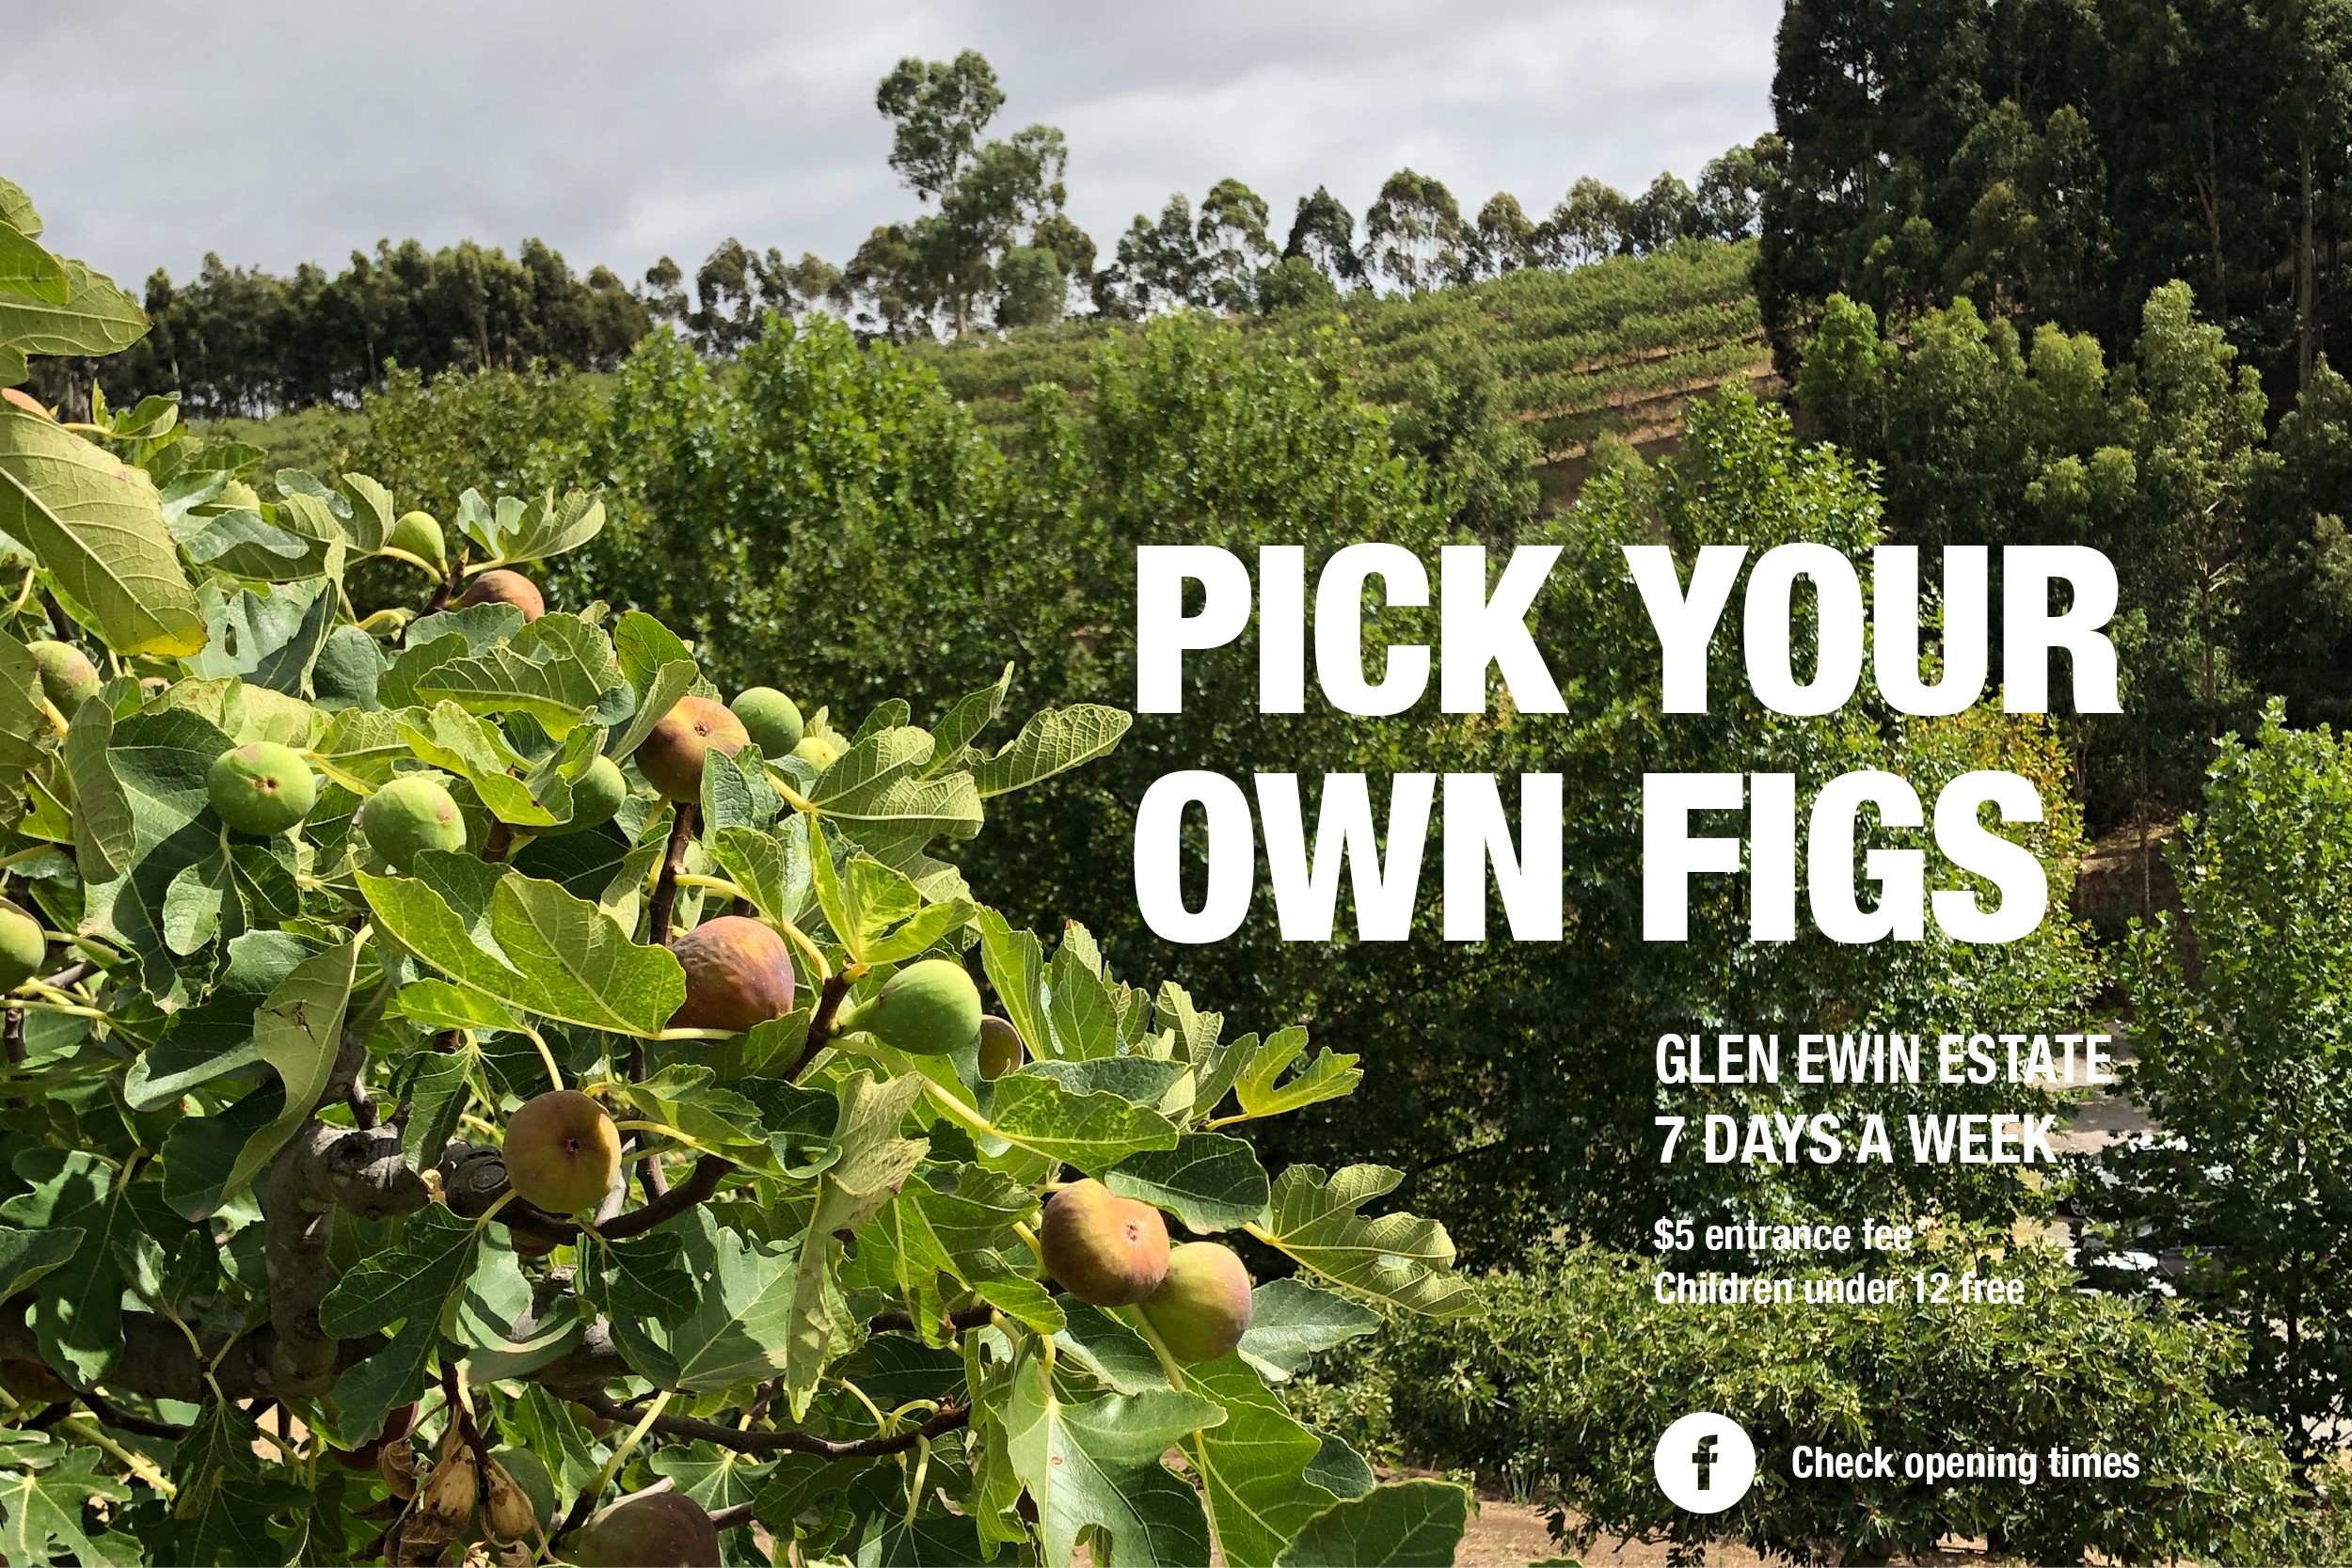 Pick Your Own Figs and cellar door at Glen Ewin Estate